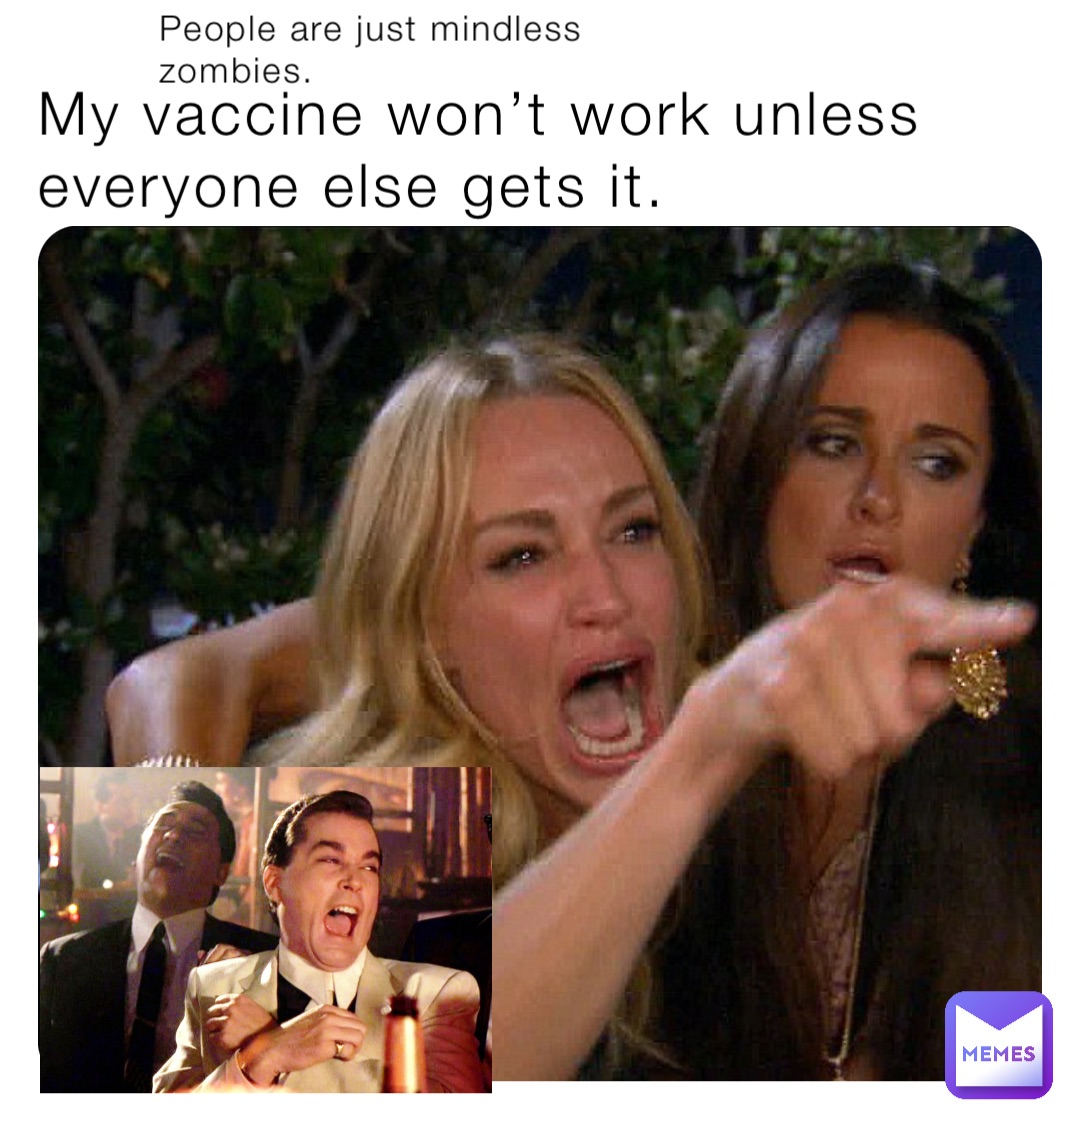 My vaccine won’t work unless everyone else gets it. People are just mindless zombies.